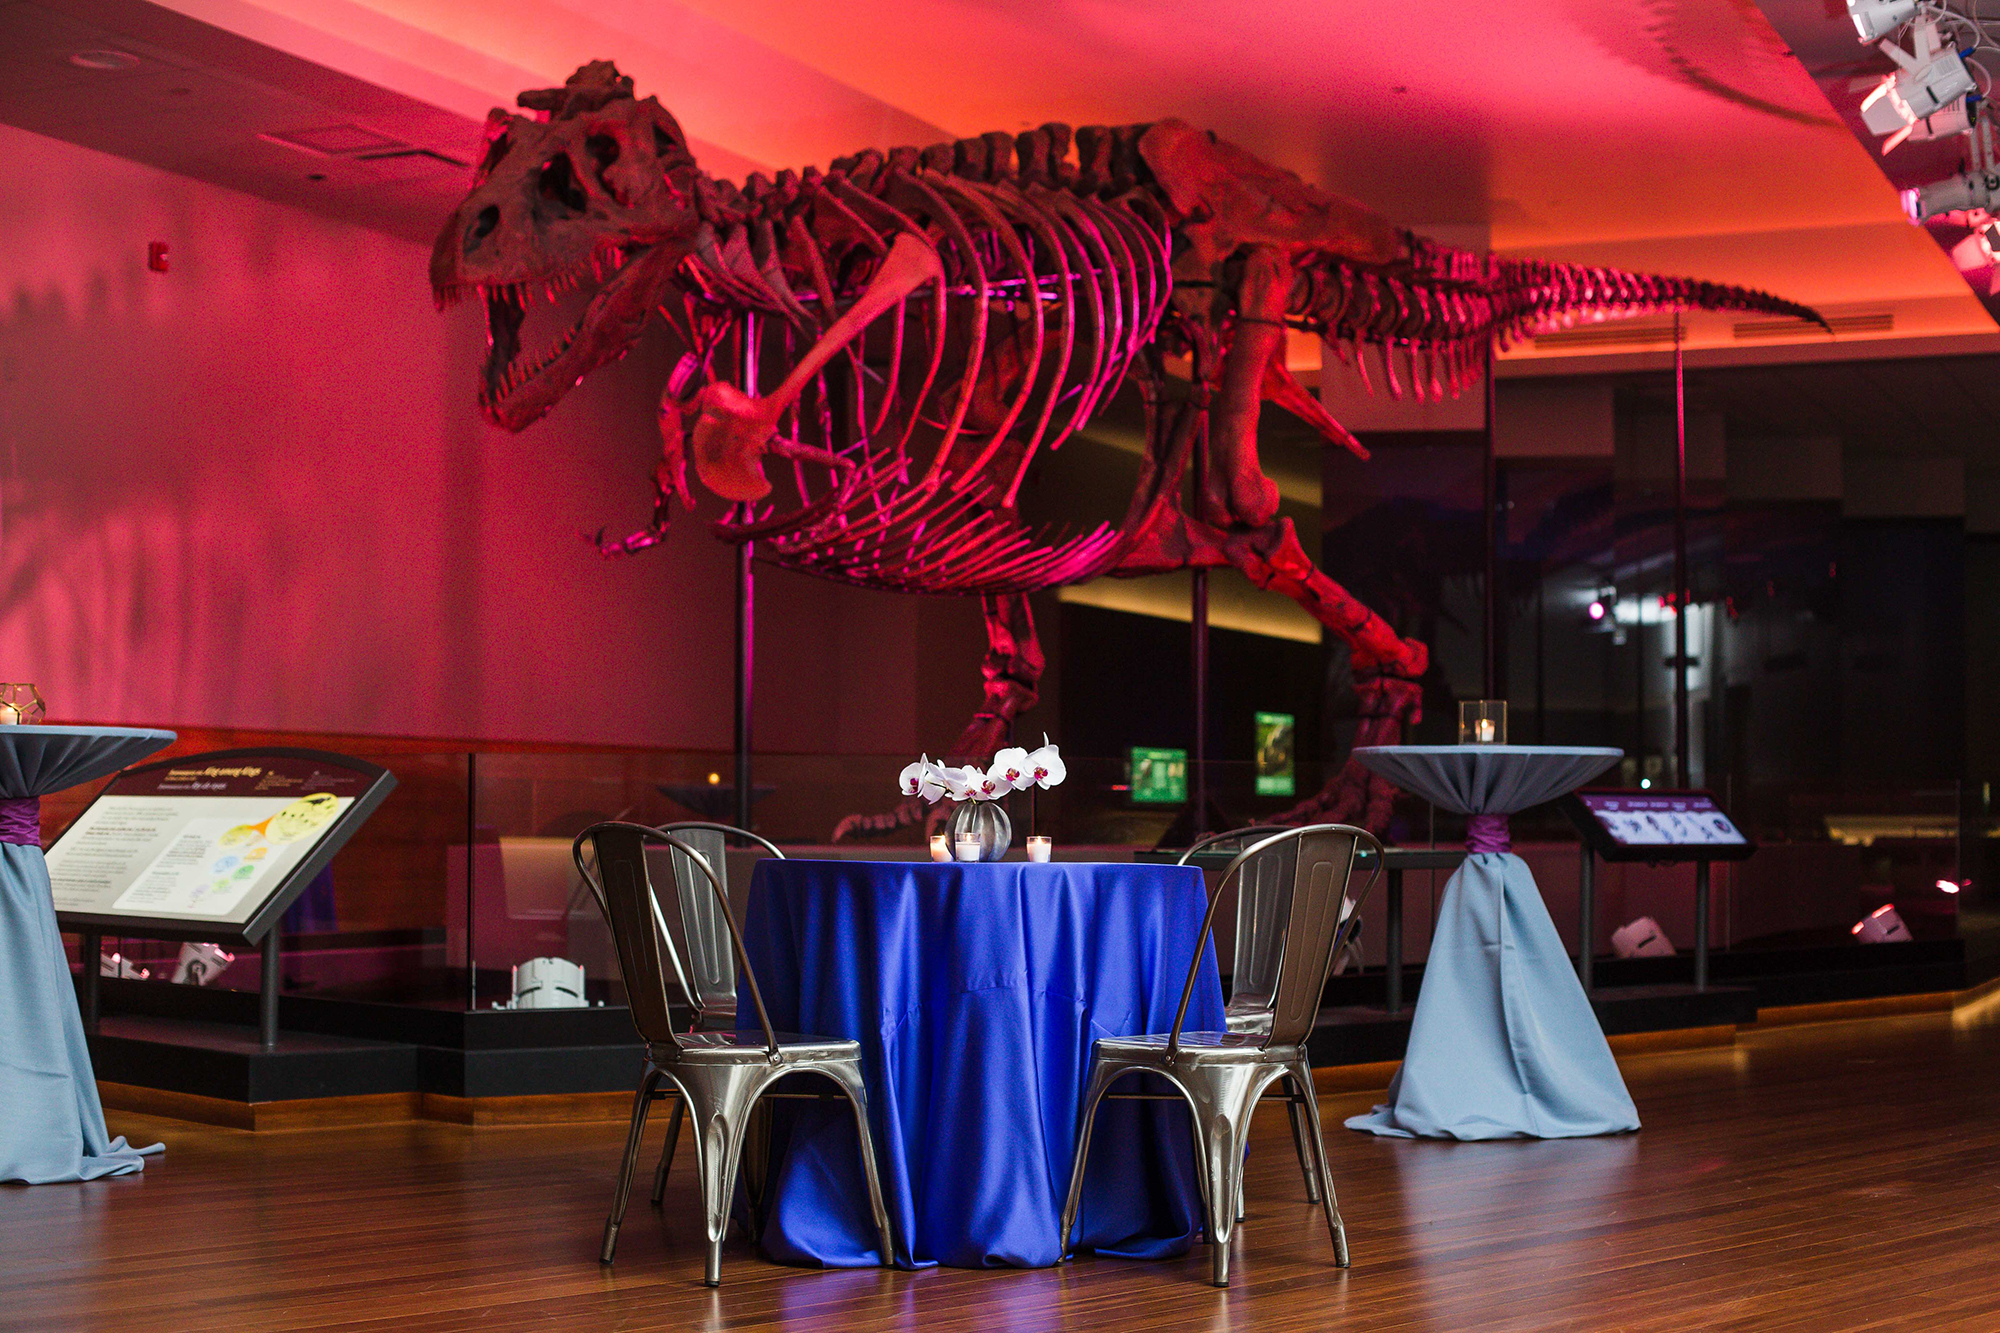 A table is set for two in SUE's gallery. The table features two chairs, a blue table cloth, and floral center piece. SUE's fossil, illuminated by red lights overhead, is visible in the background.